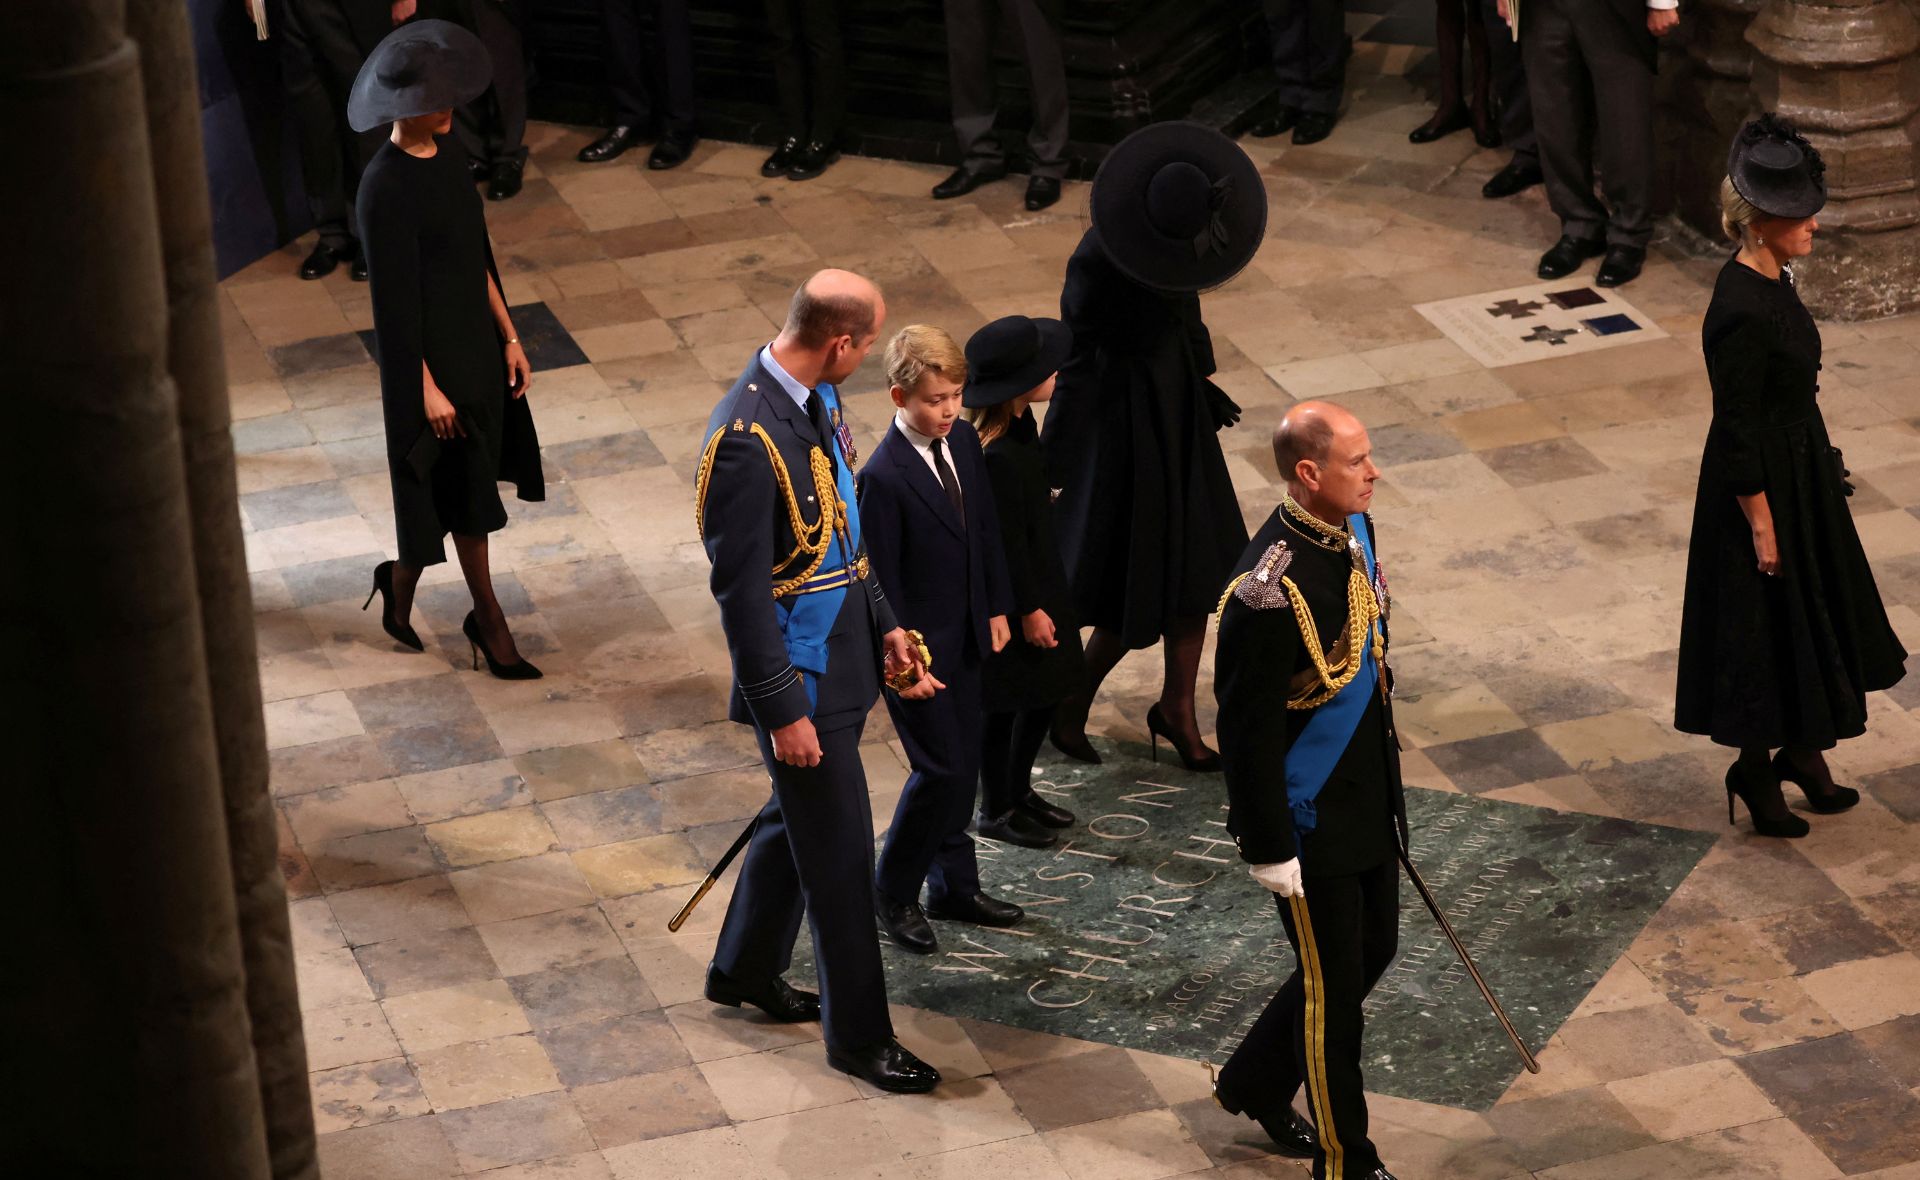 Prince George and Princess Charlotte join royal family as they walk solemnly behind The Queen’s coffin